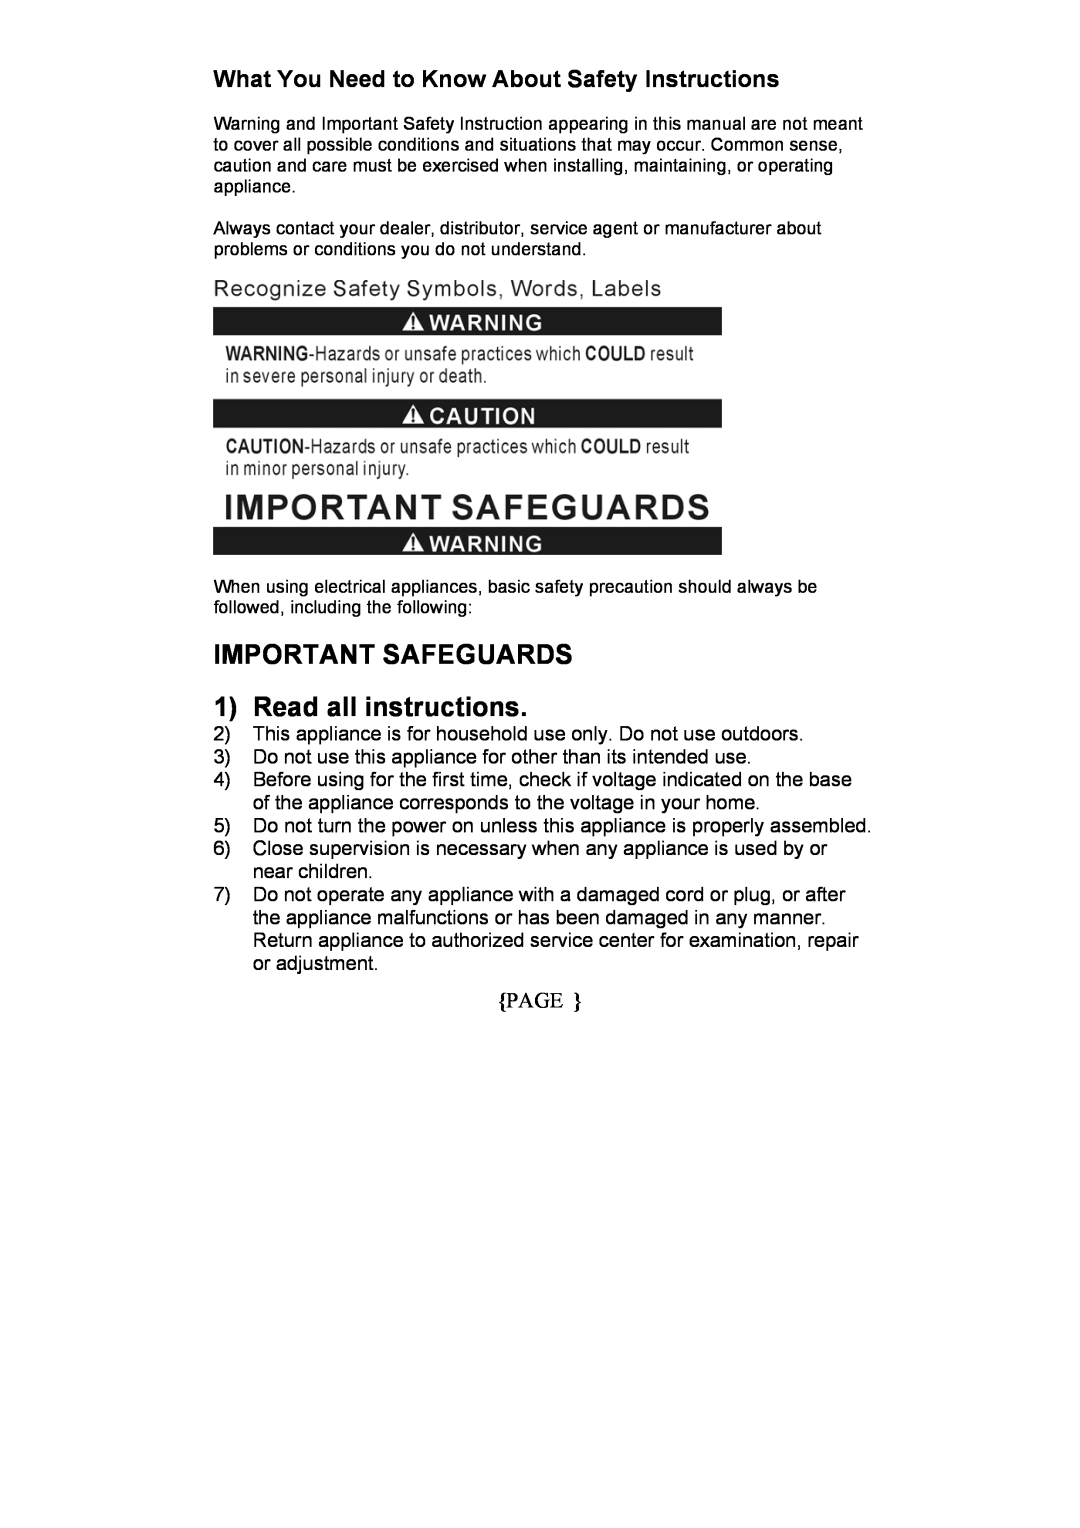 Maytag MCCM1NB12 IMPORTANT SAFEGUARDS 1 Read all instructions, What You Need to Know About Safety Instructions, Page 